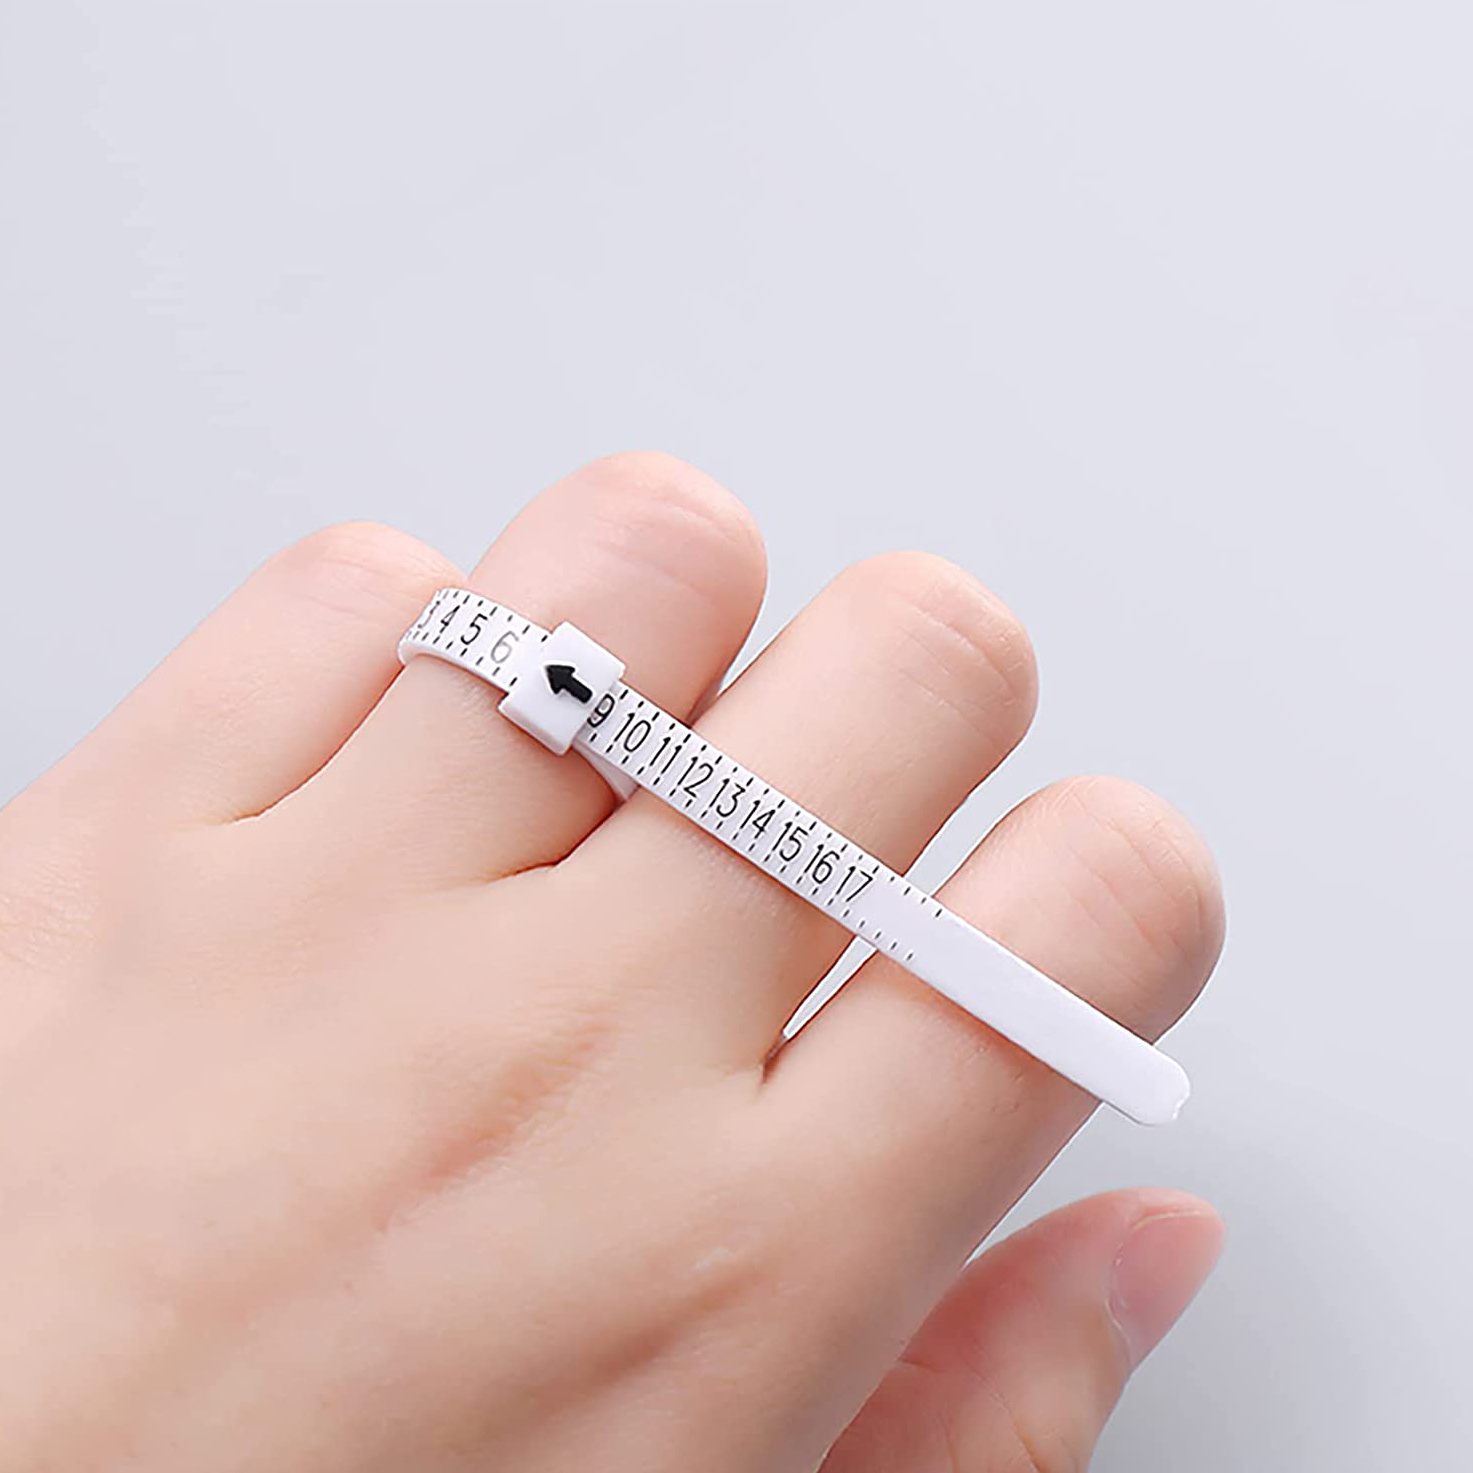 Reusable Finger Size Gauge Measure Ring Sizer Plastic Us Ring Measurement  Tool Jewelry Ring Sizing Kit Finger Measurer For Men And Women, 1-17 Usa  Rings Size White And Black - Temu Lithuania